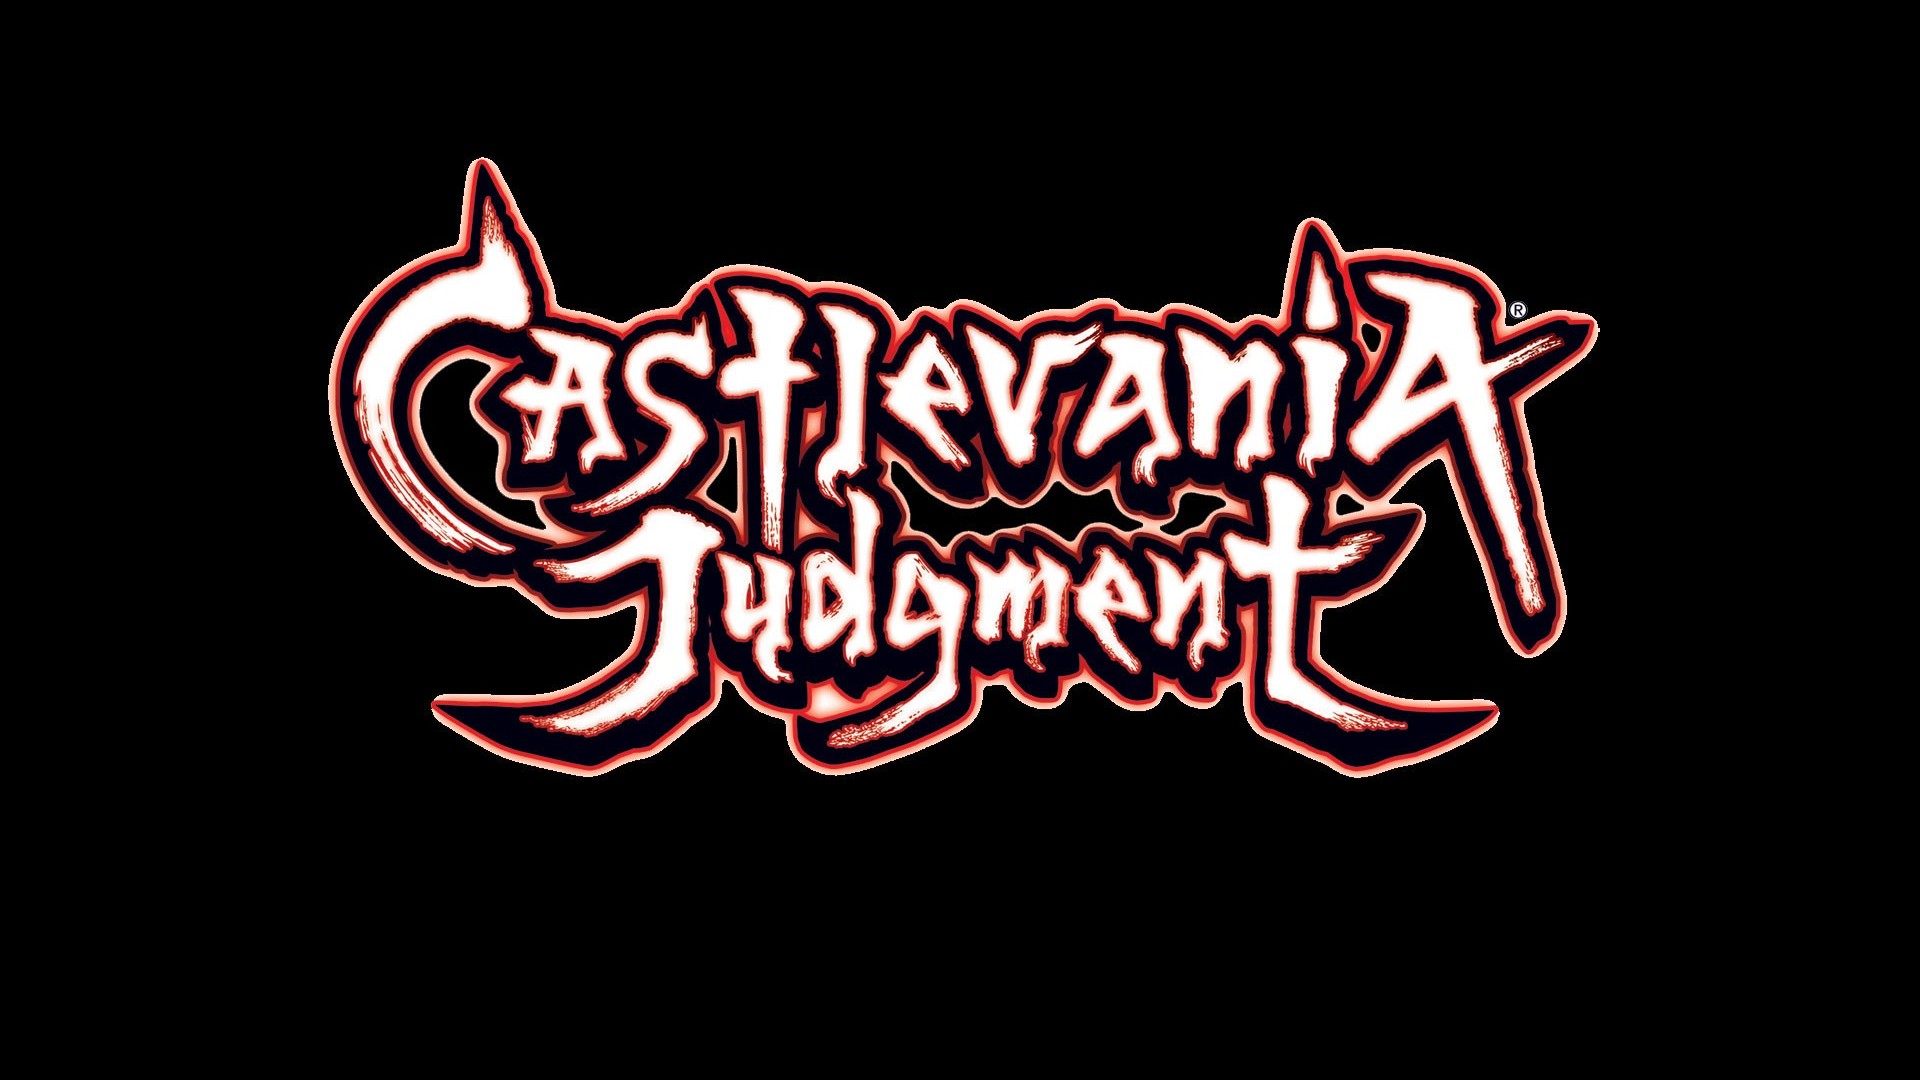 Video Game Castlevania Judgment HD Wallpaper | Background Image